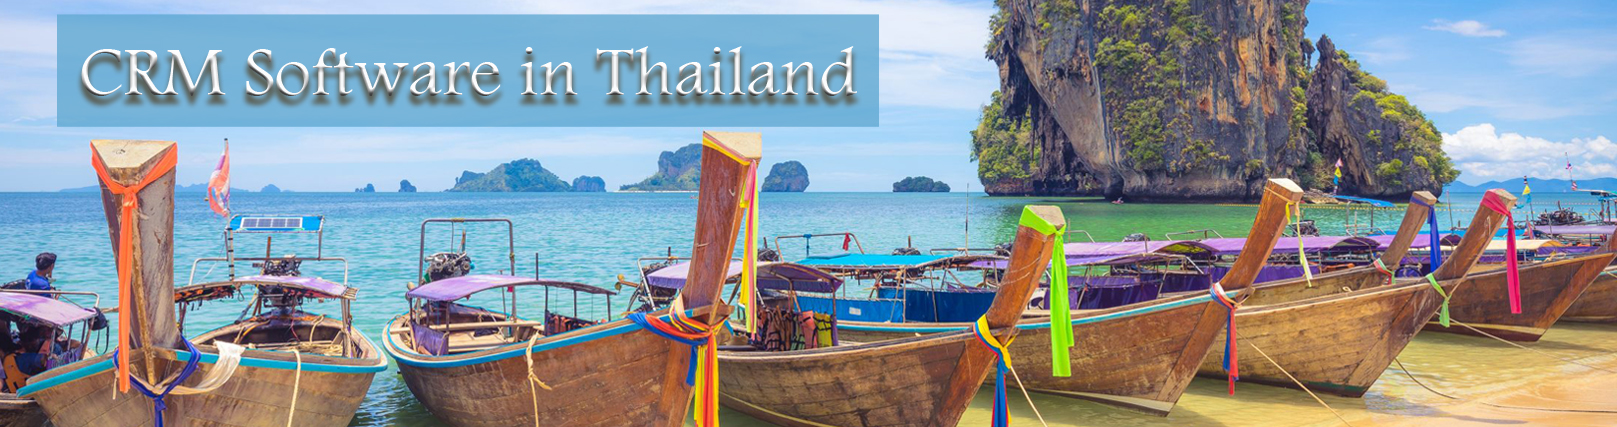 crm in thailand banner img1